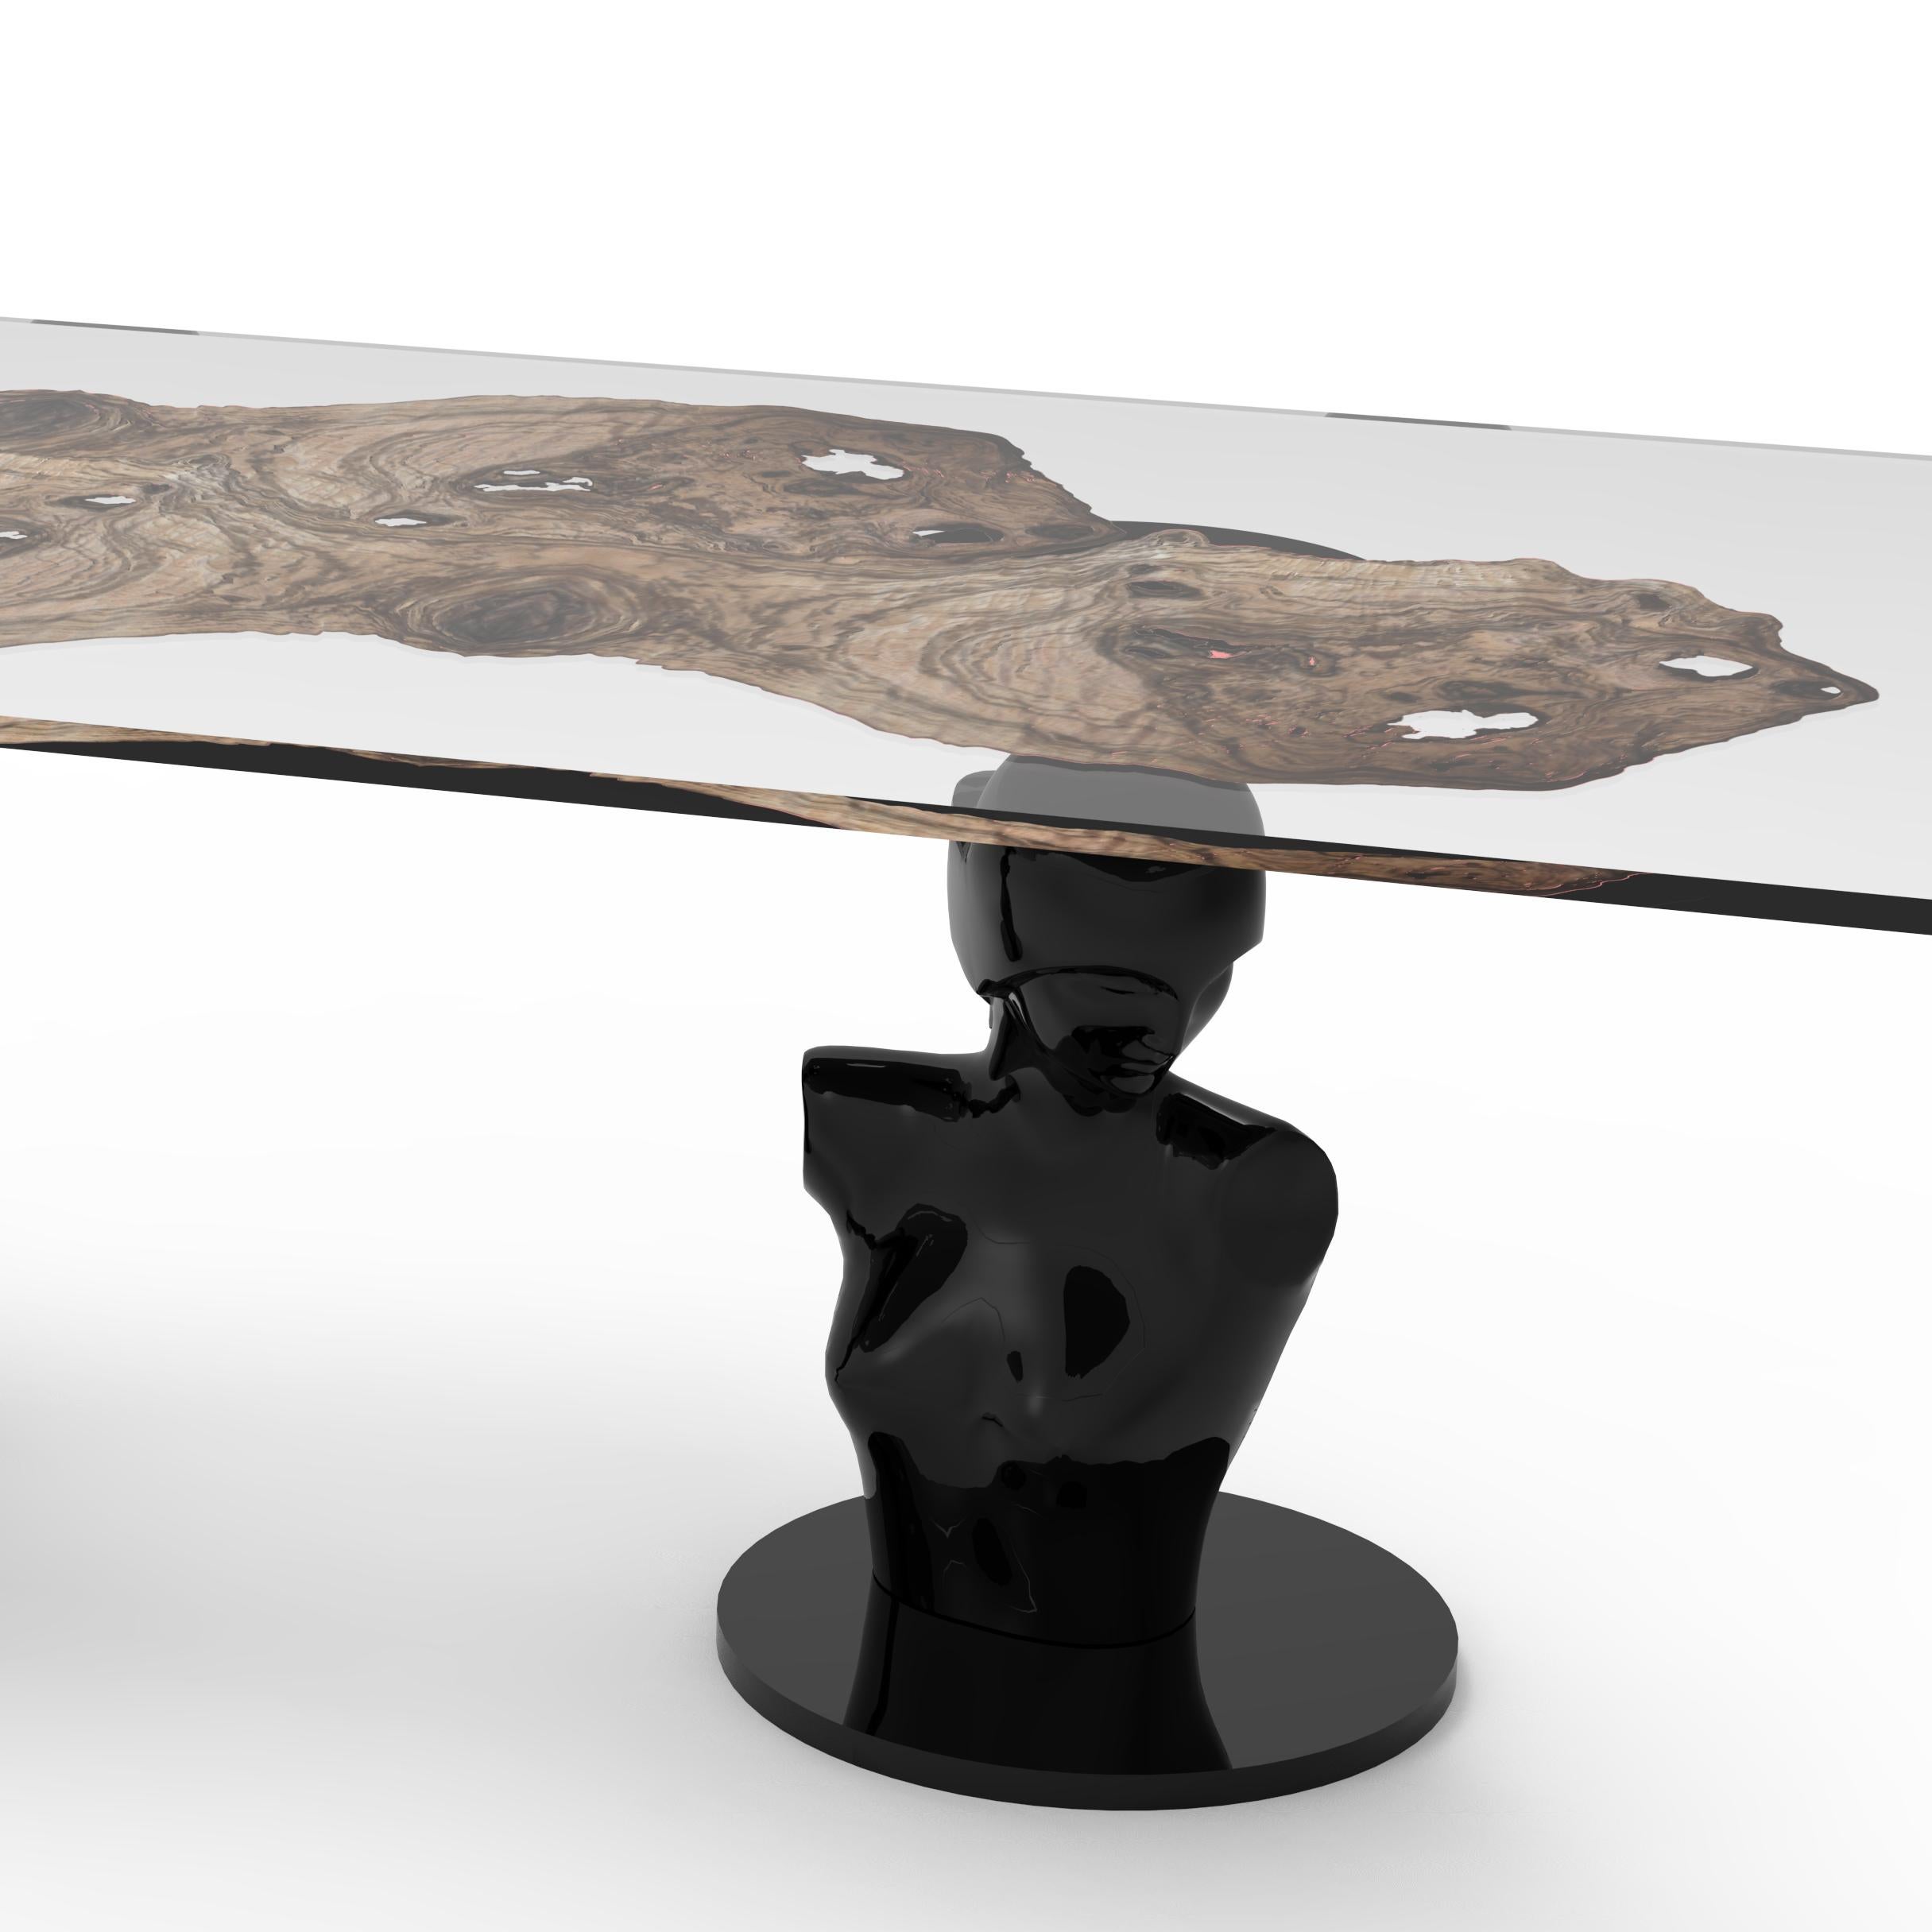 Italian 21st Century Lorsky Table, Resin and Elm Veneer, Carved Wood Base, Made in Italy For Sale